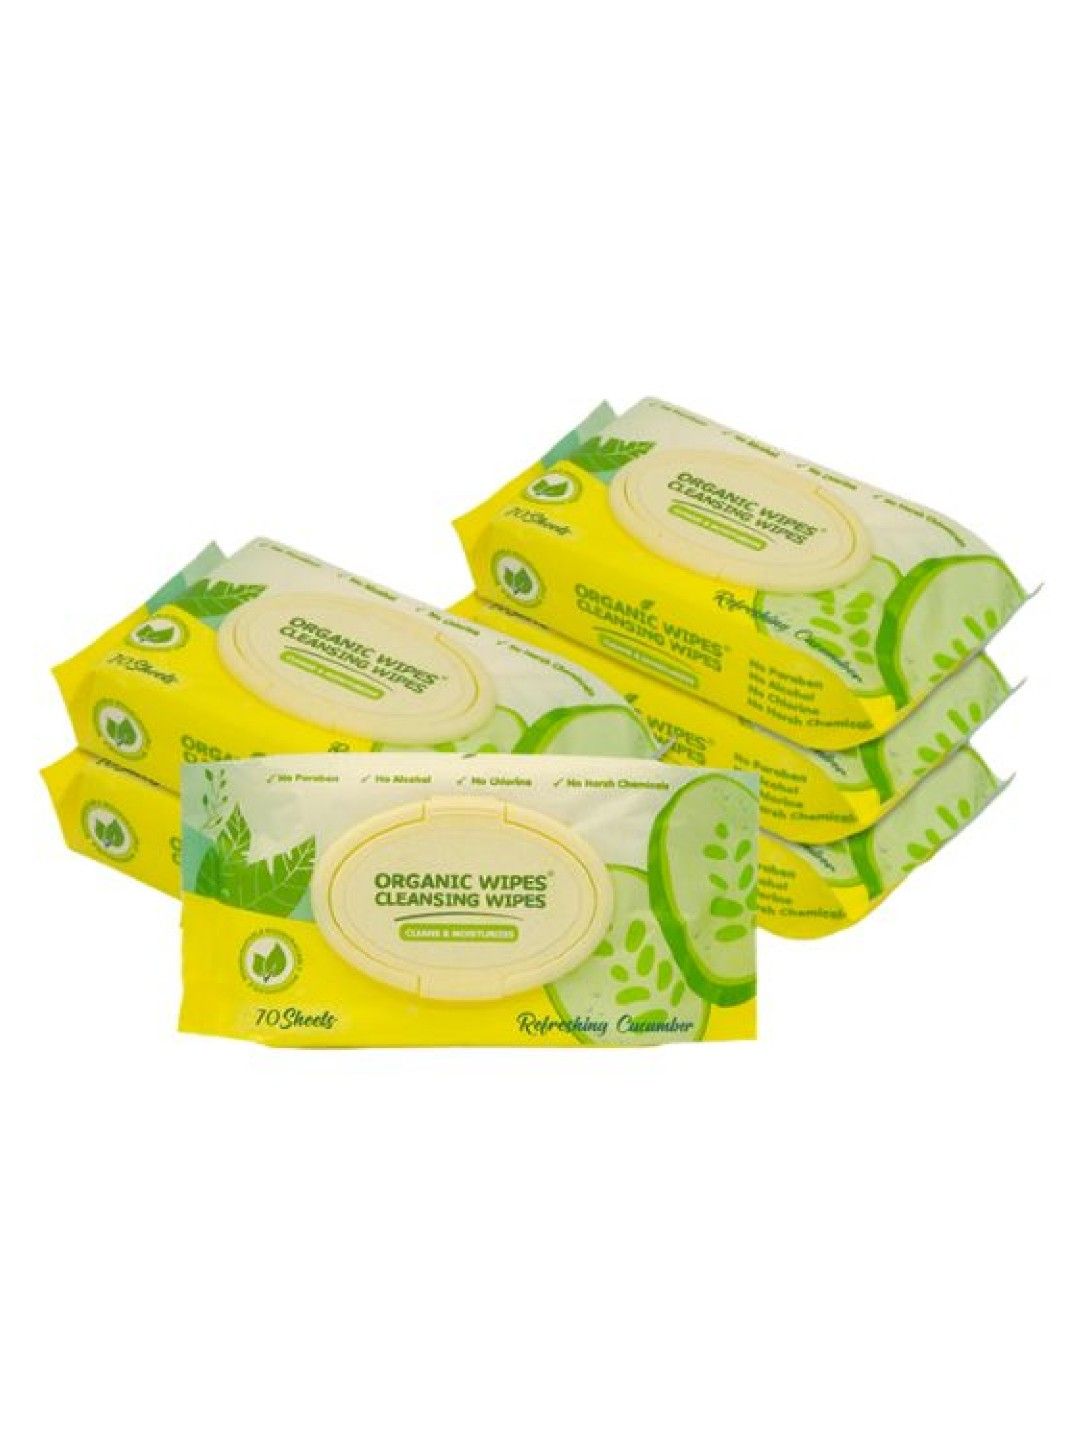 Organic Baby Wipes Organic Wipes Cleansing Wipes Refreshing Cucumber (70s x 6-pack)